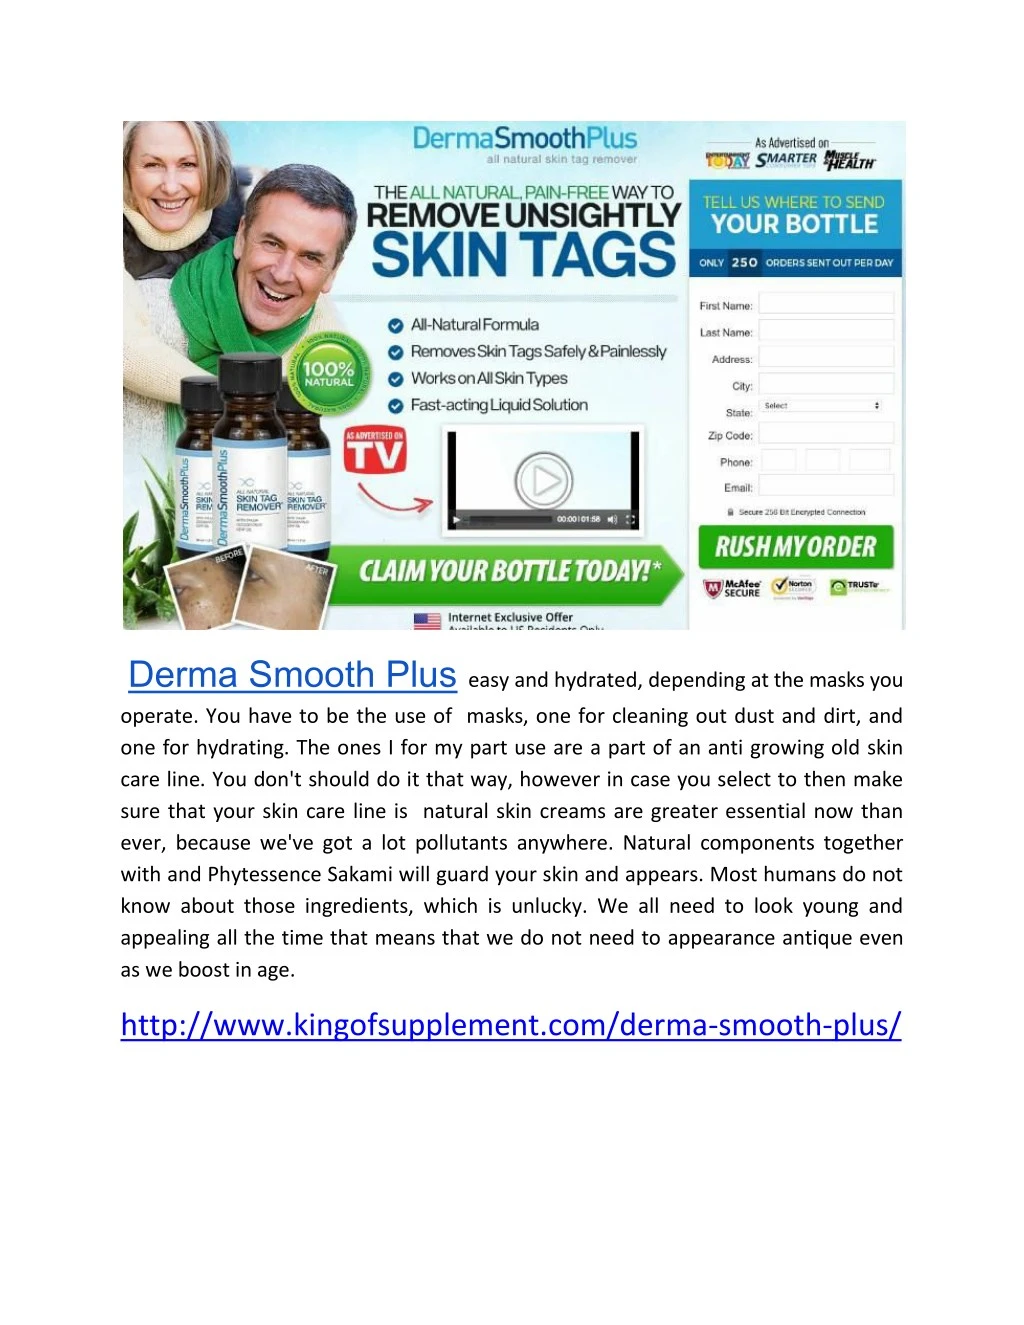 derma smooth plus easy and hydrated depending